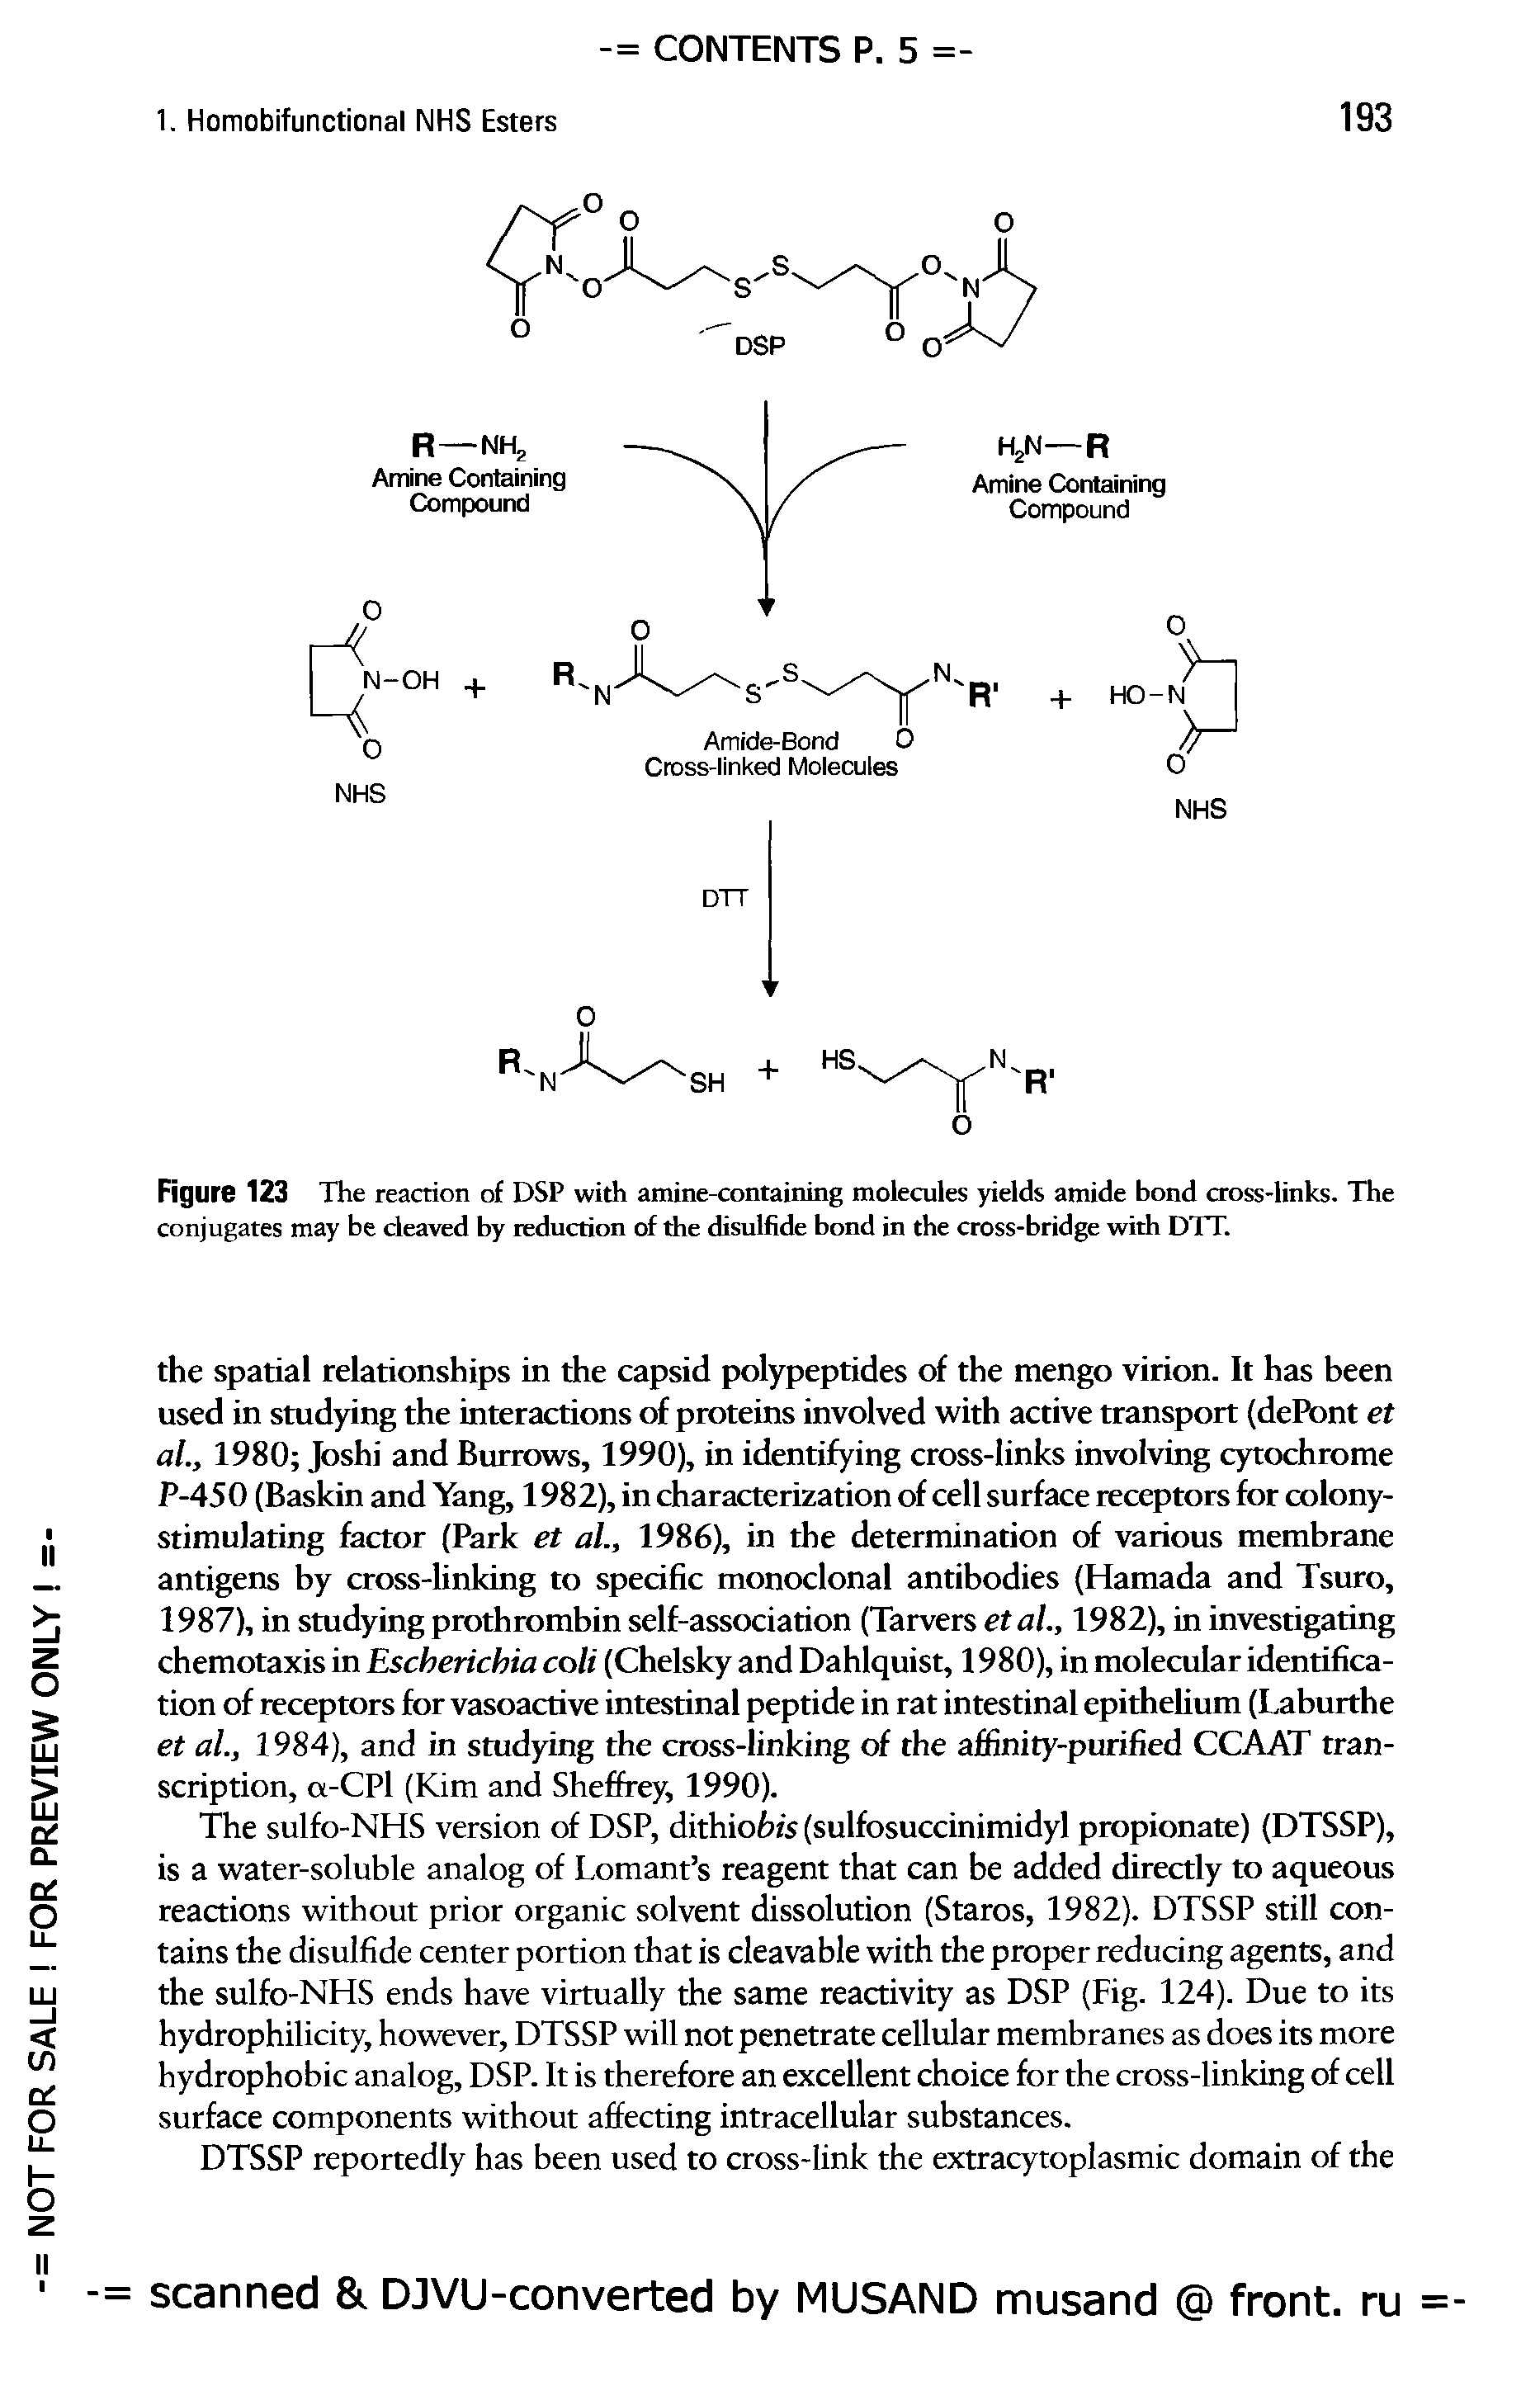 Figure 123 The reaction of DSP with amine-containing molecules yields amide bond cross-links. The conjugates may be cleaved by reduction of the disulfide bond in the cross-bridge with DTT.